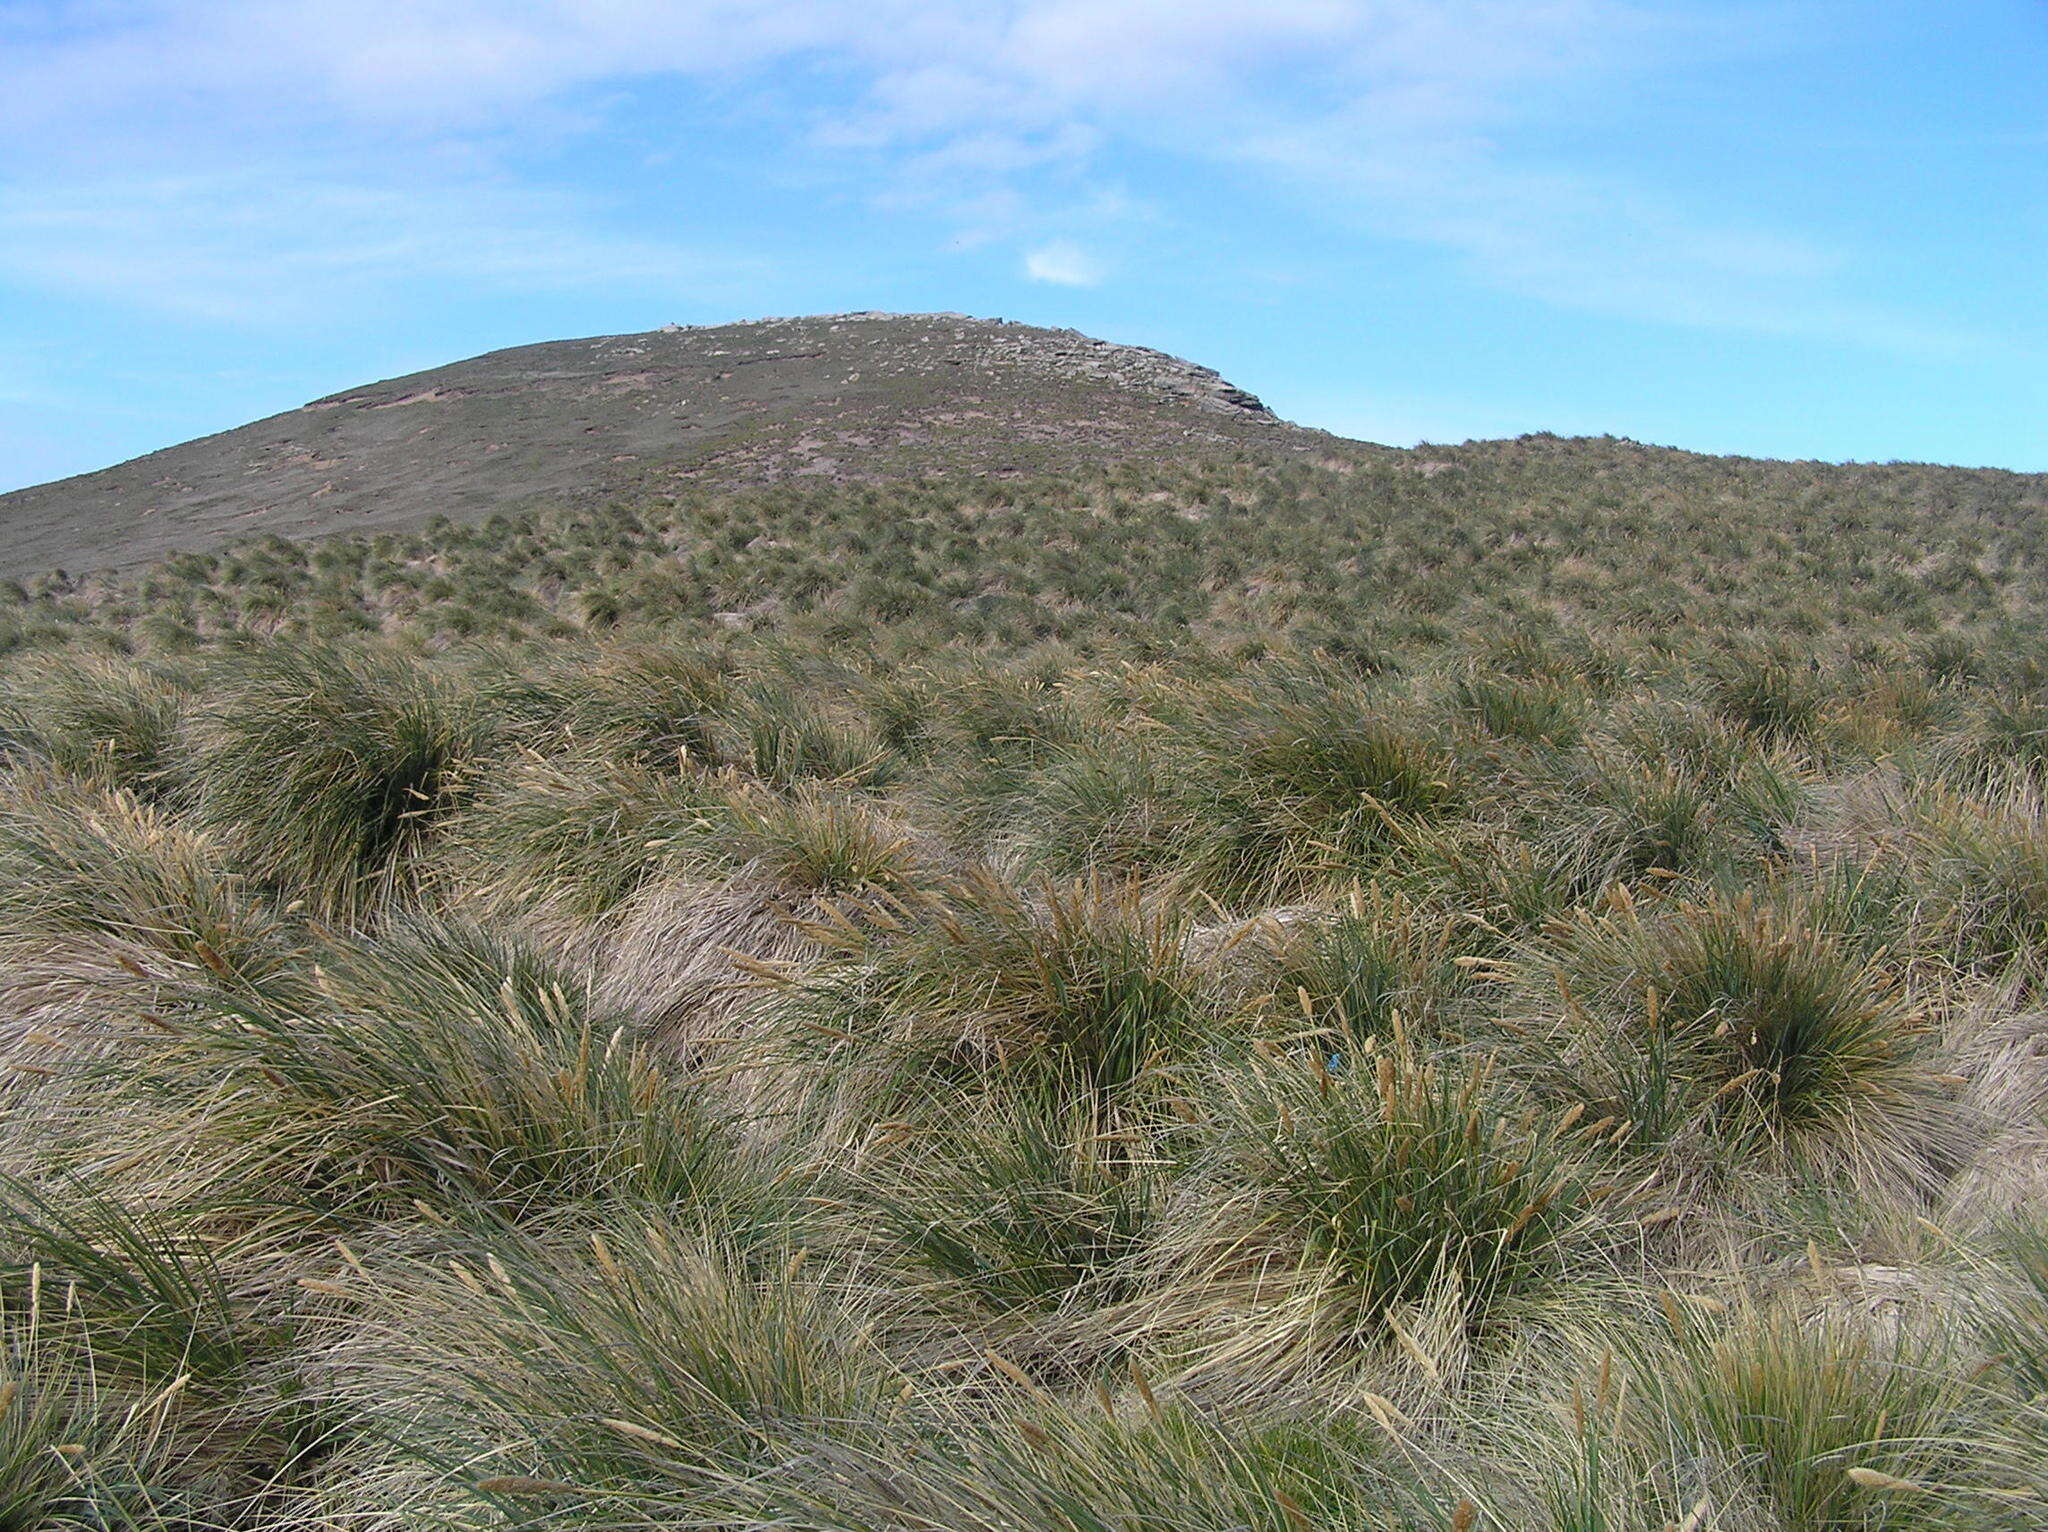 Image of tussock grass